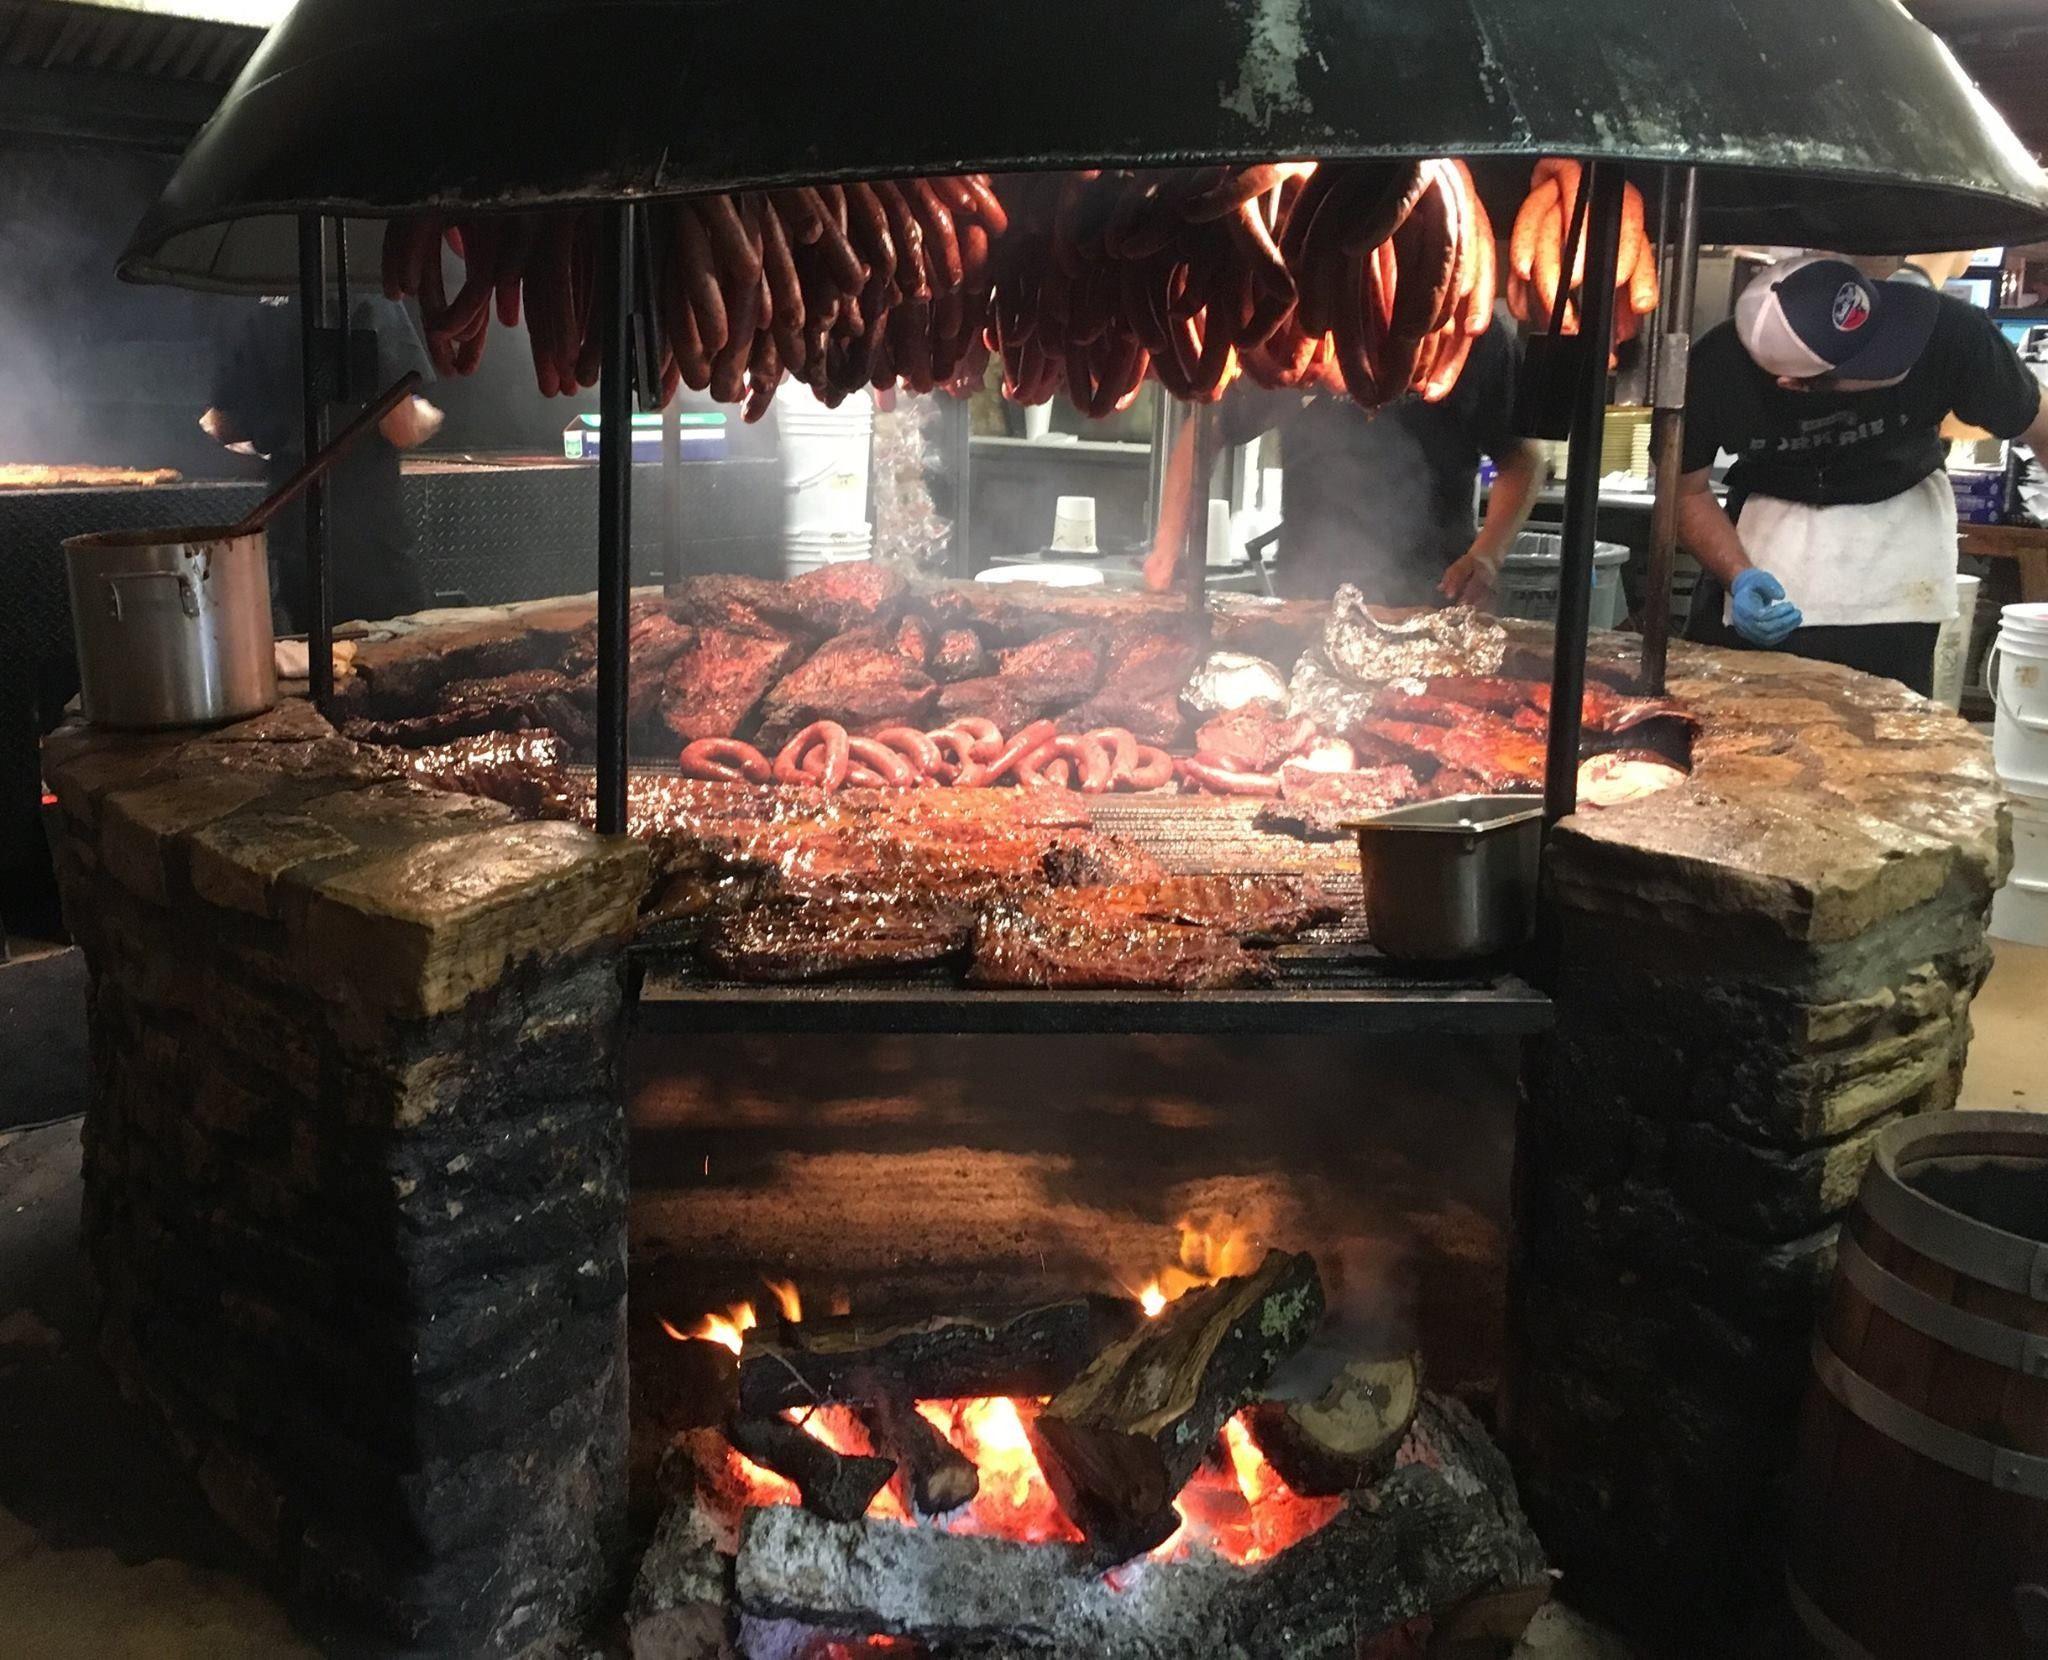 Red Z. reccomend The salt lick texas